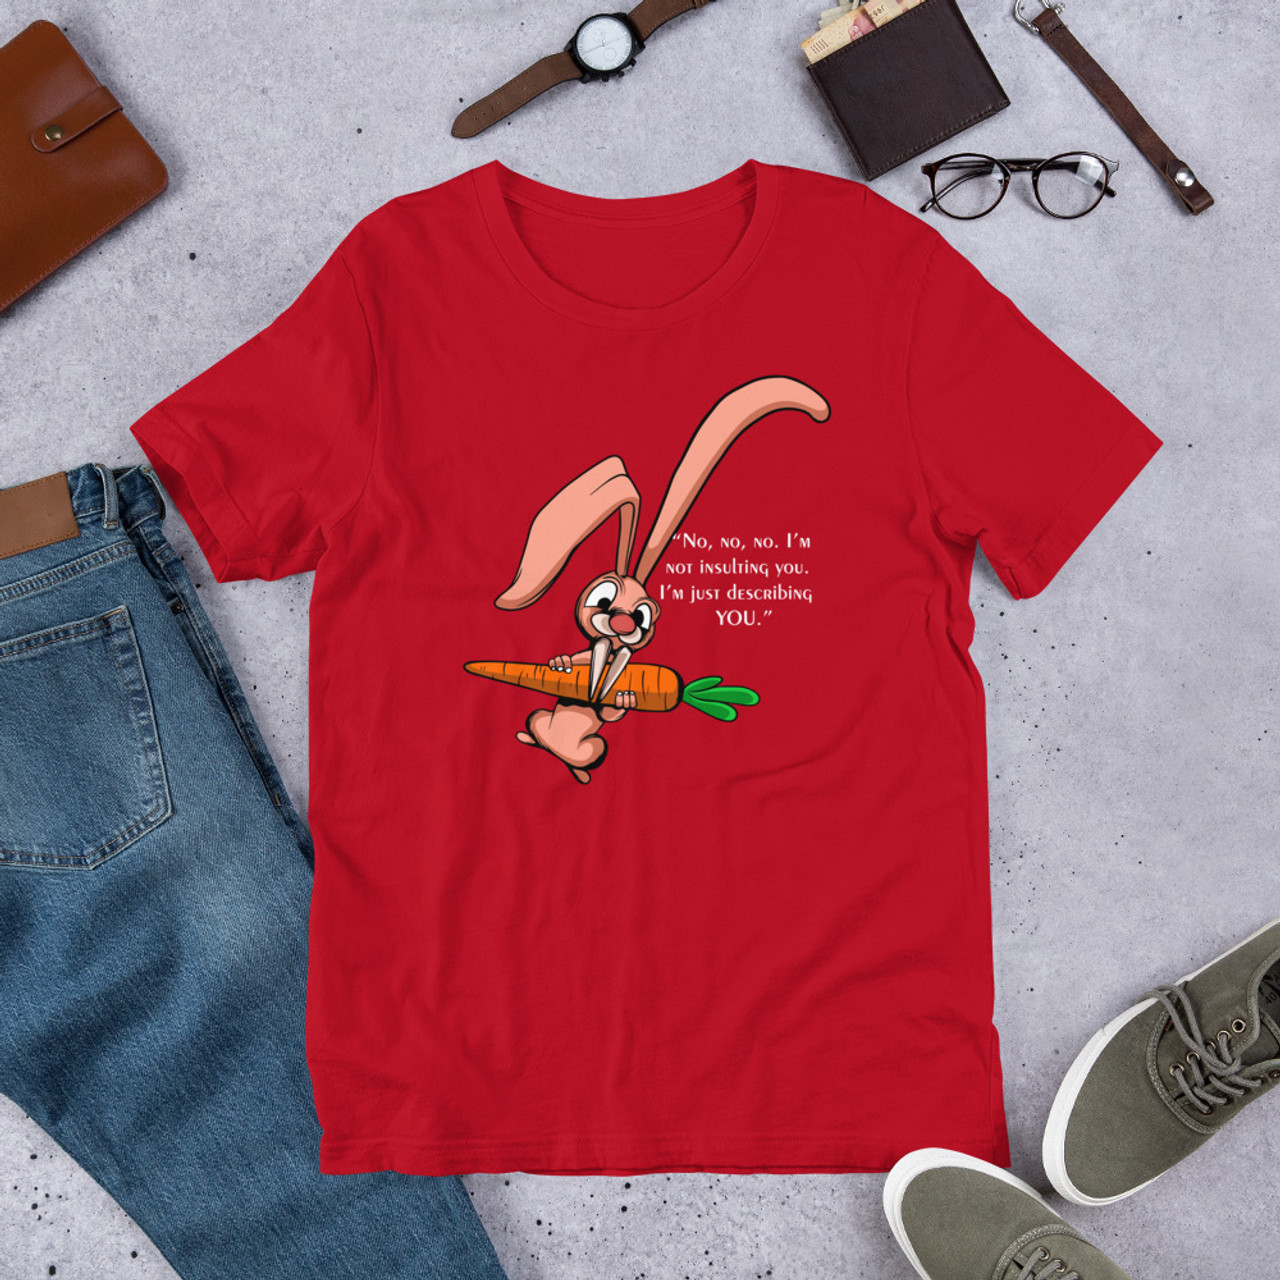 Red T-Shirt - Bella + Canvas 3001 No, no, no I'm not insulting you